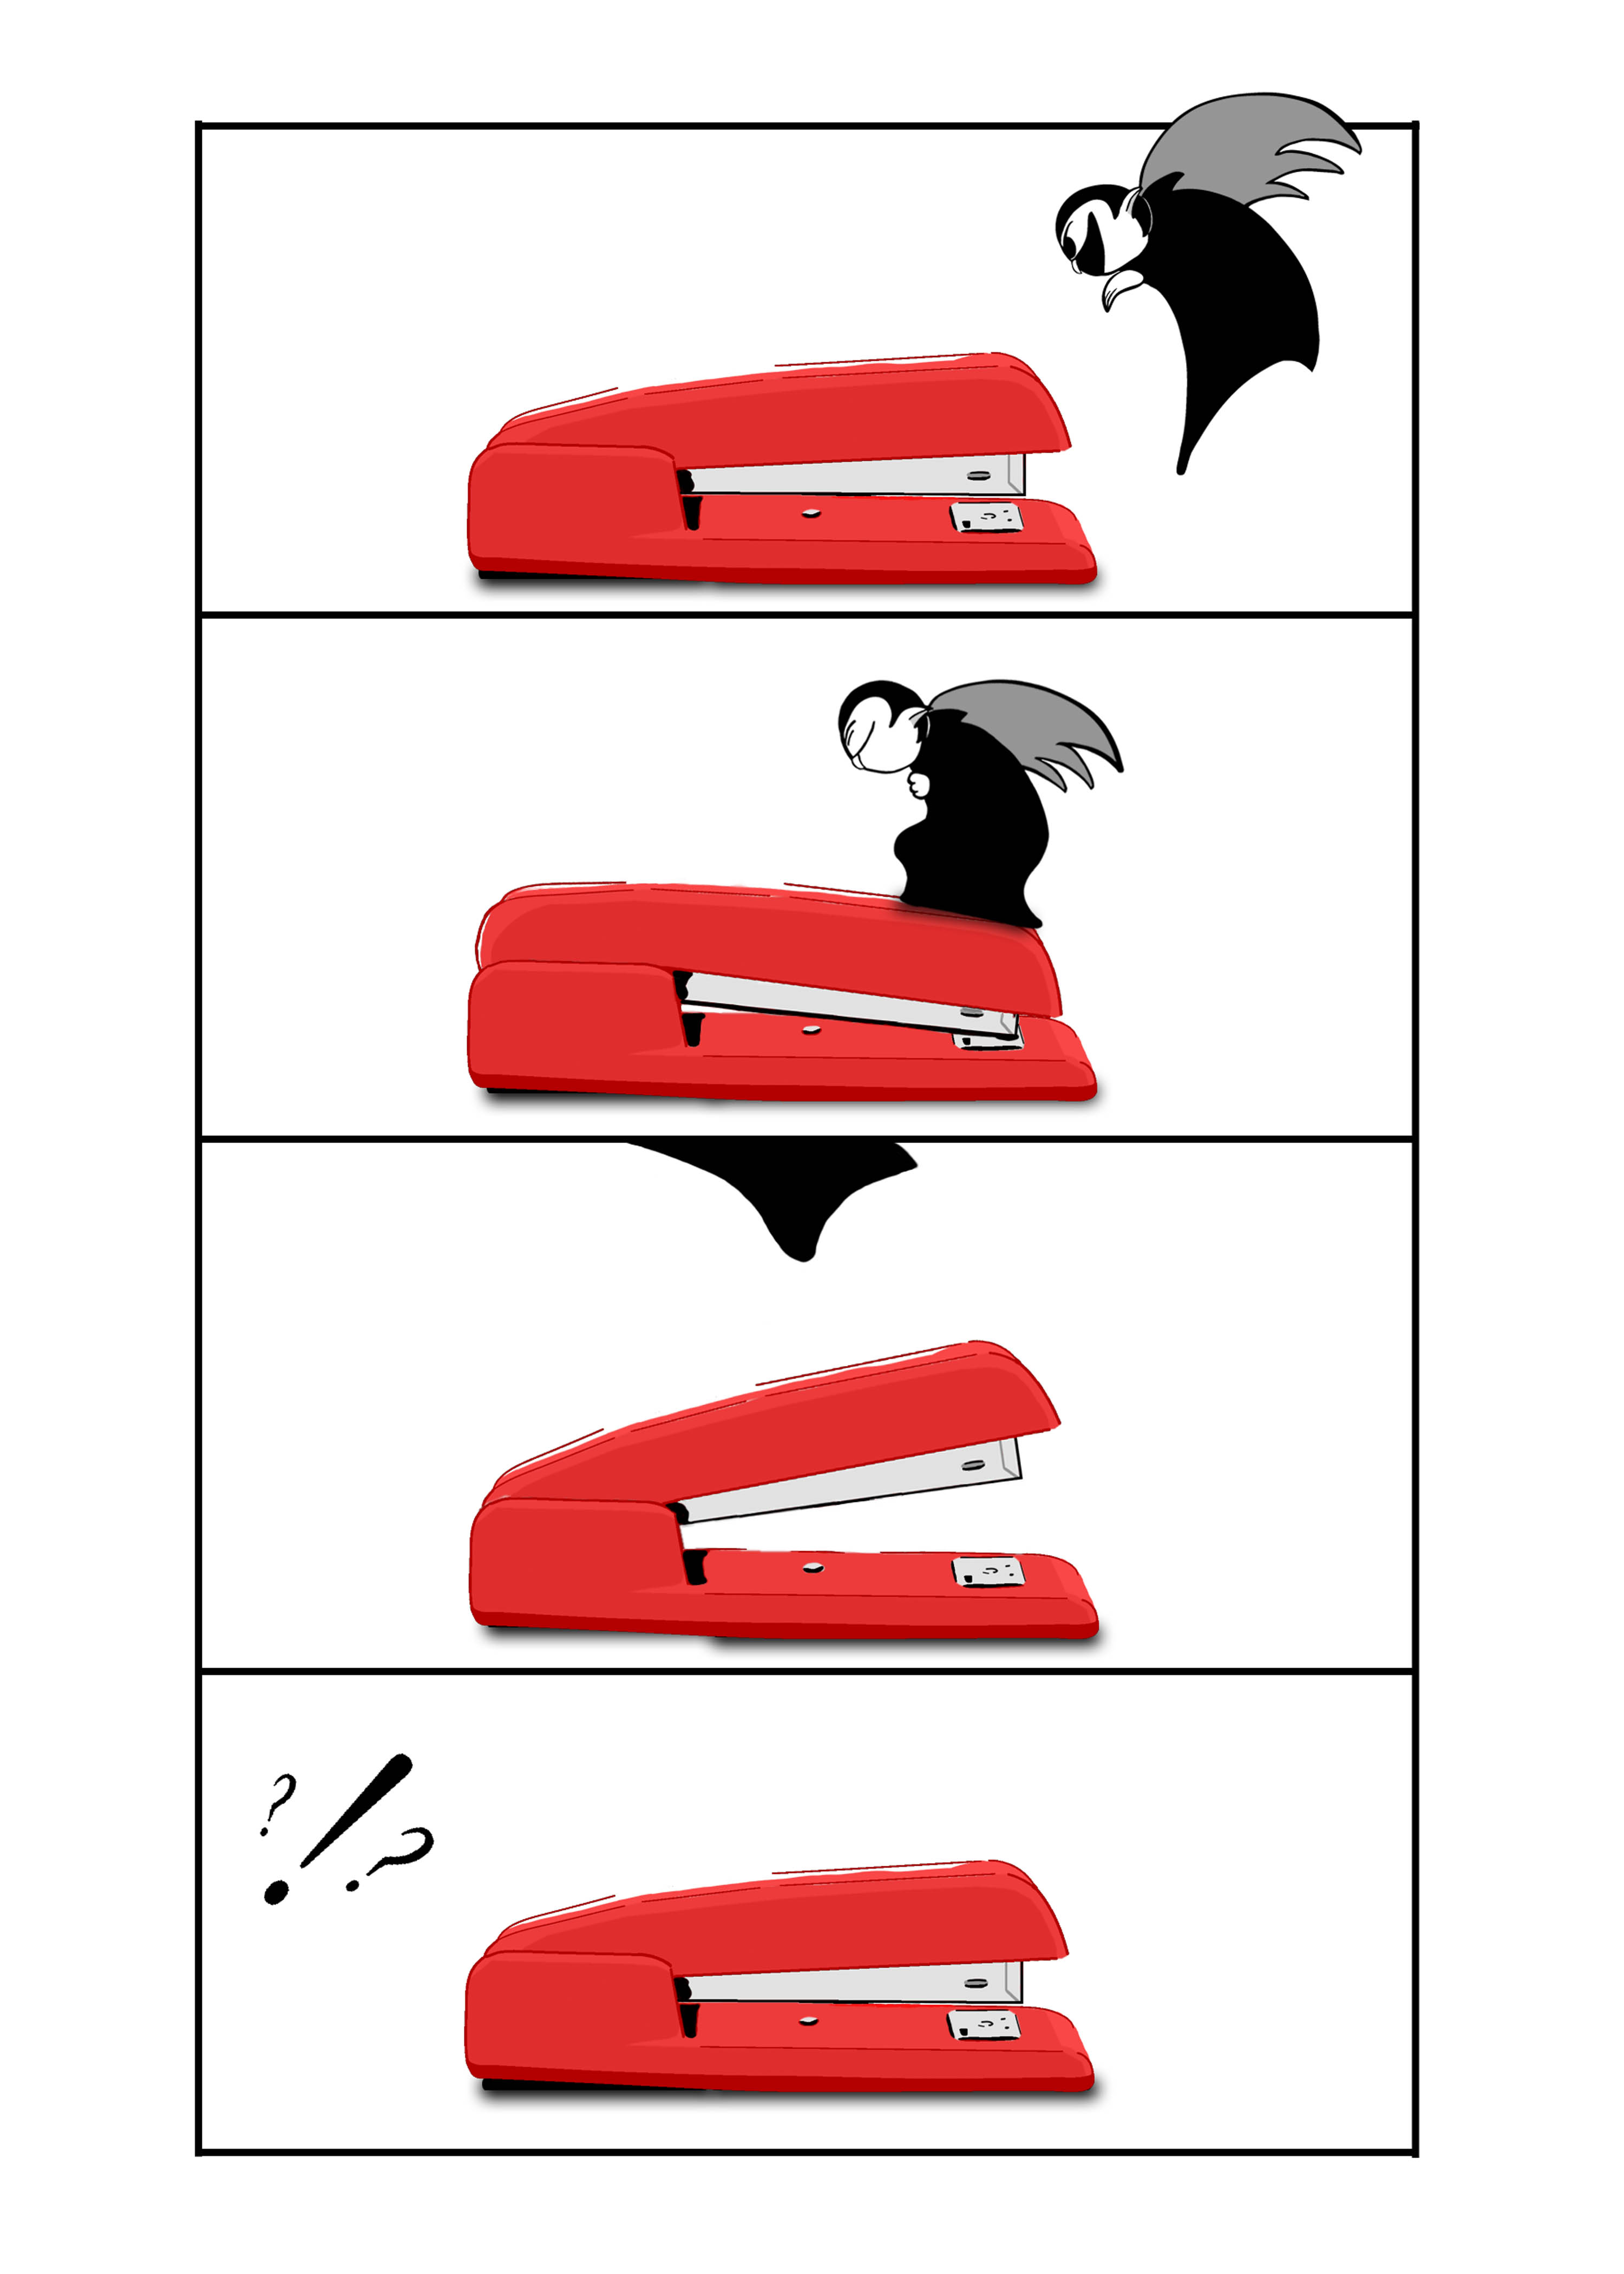 A Little Vampires pounces on a stapler and is rejected by the stapler arm’s spring action.